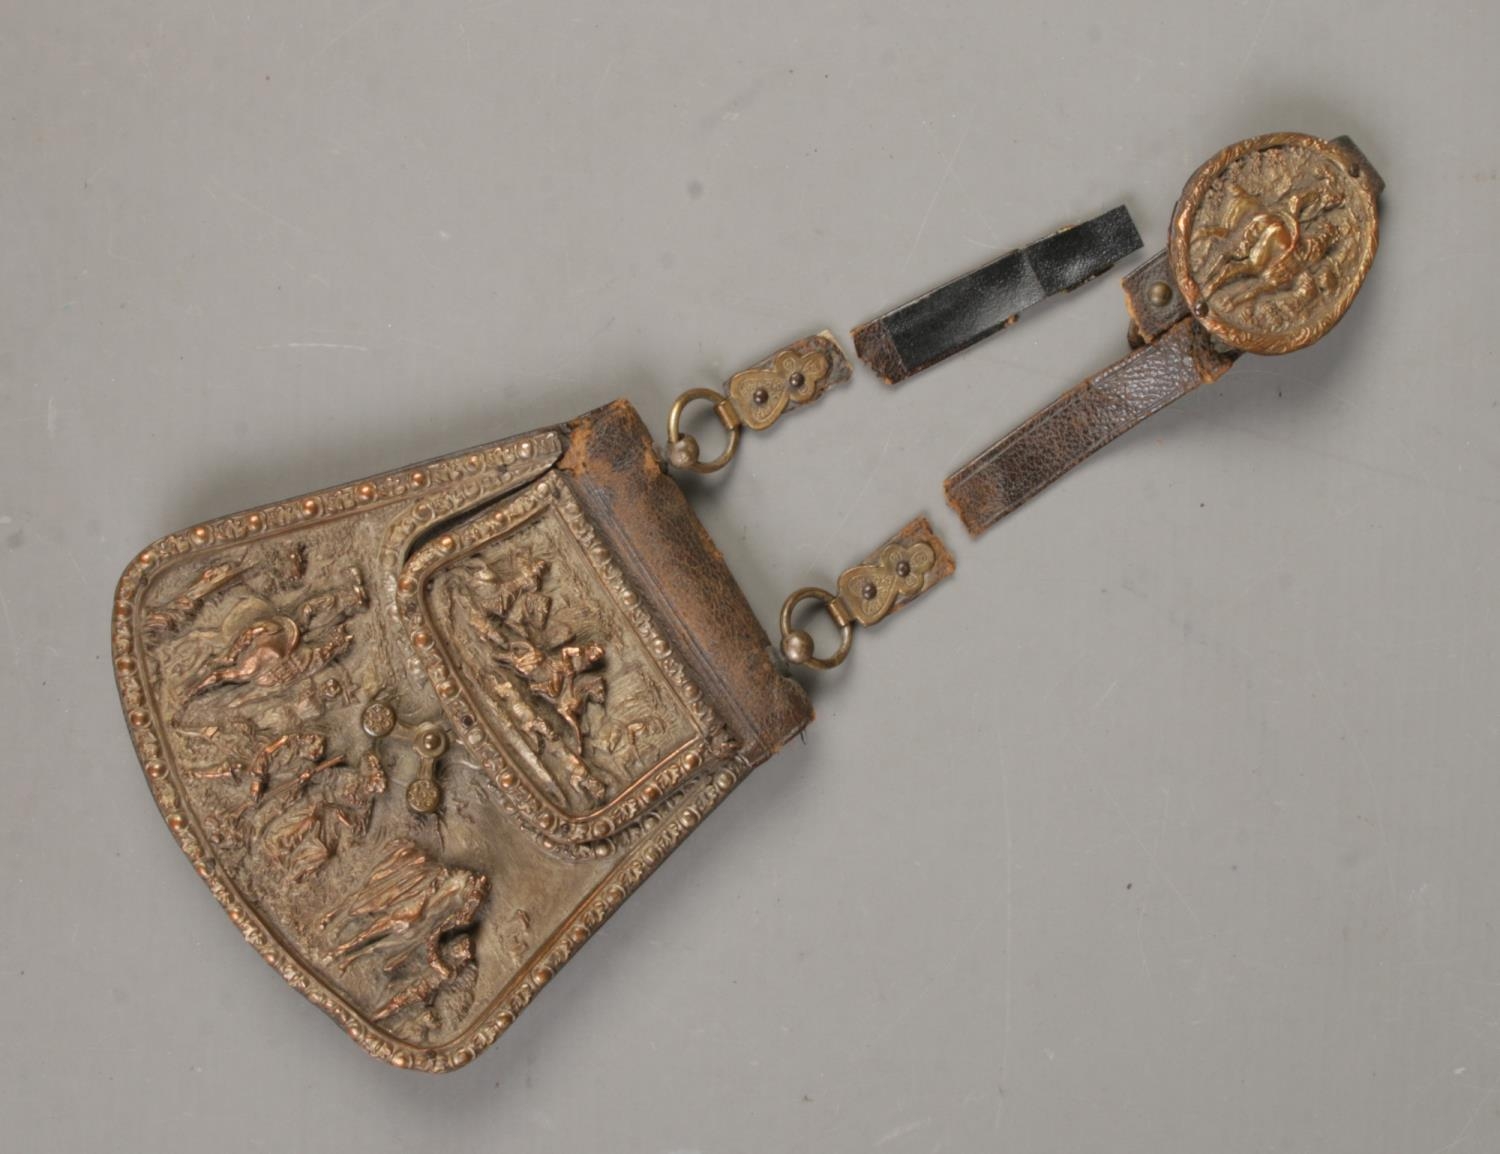 An early 20th century belt purse. Having copper front decorated with hunting scenes. Damage to